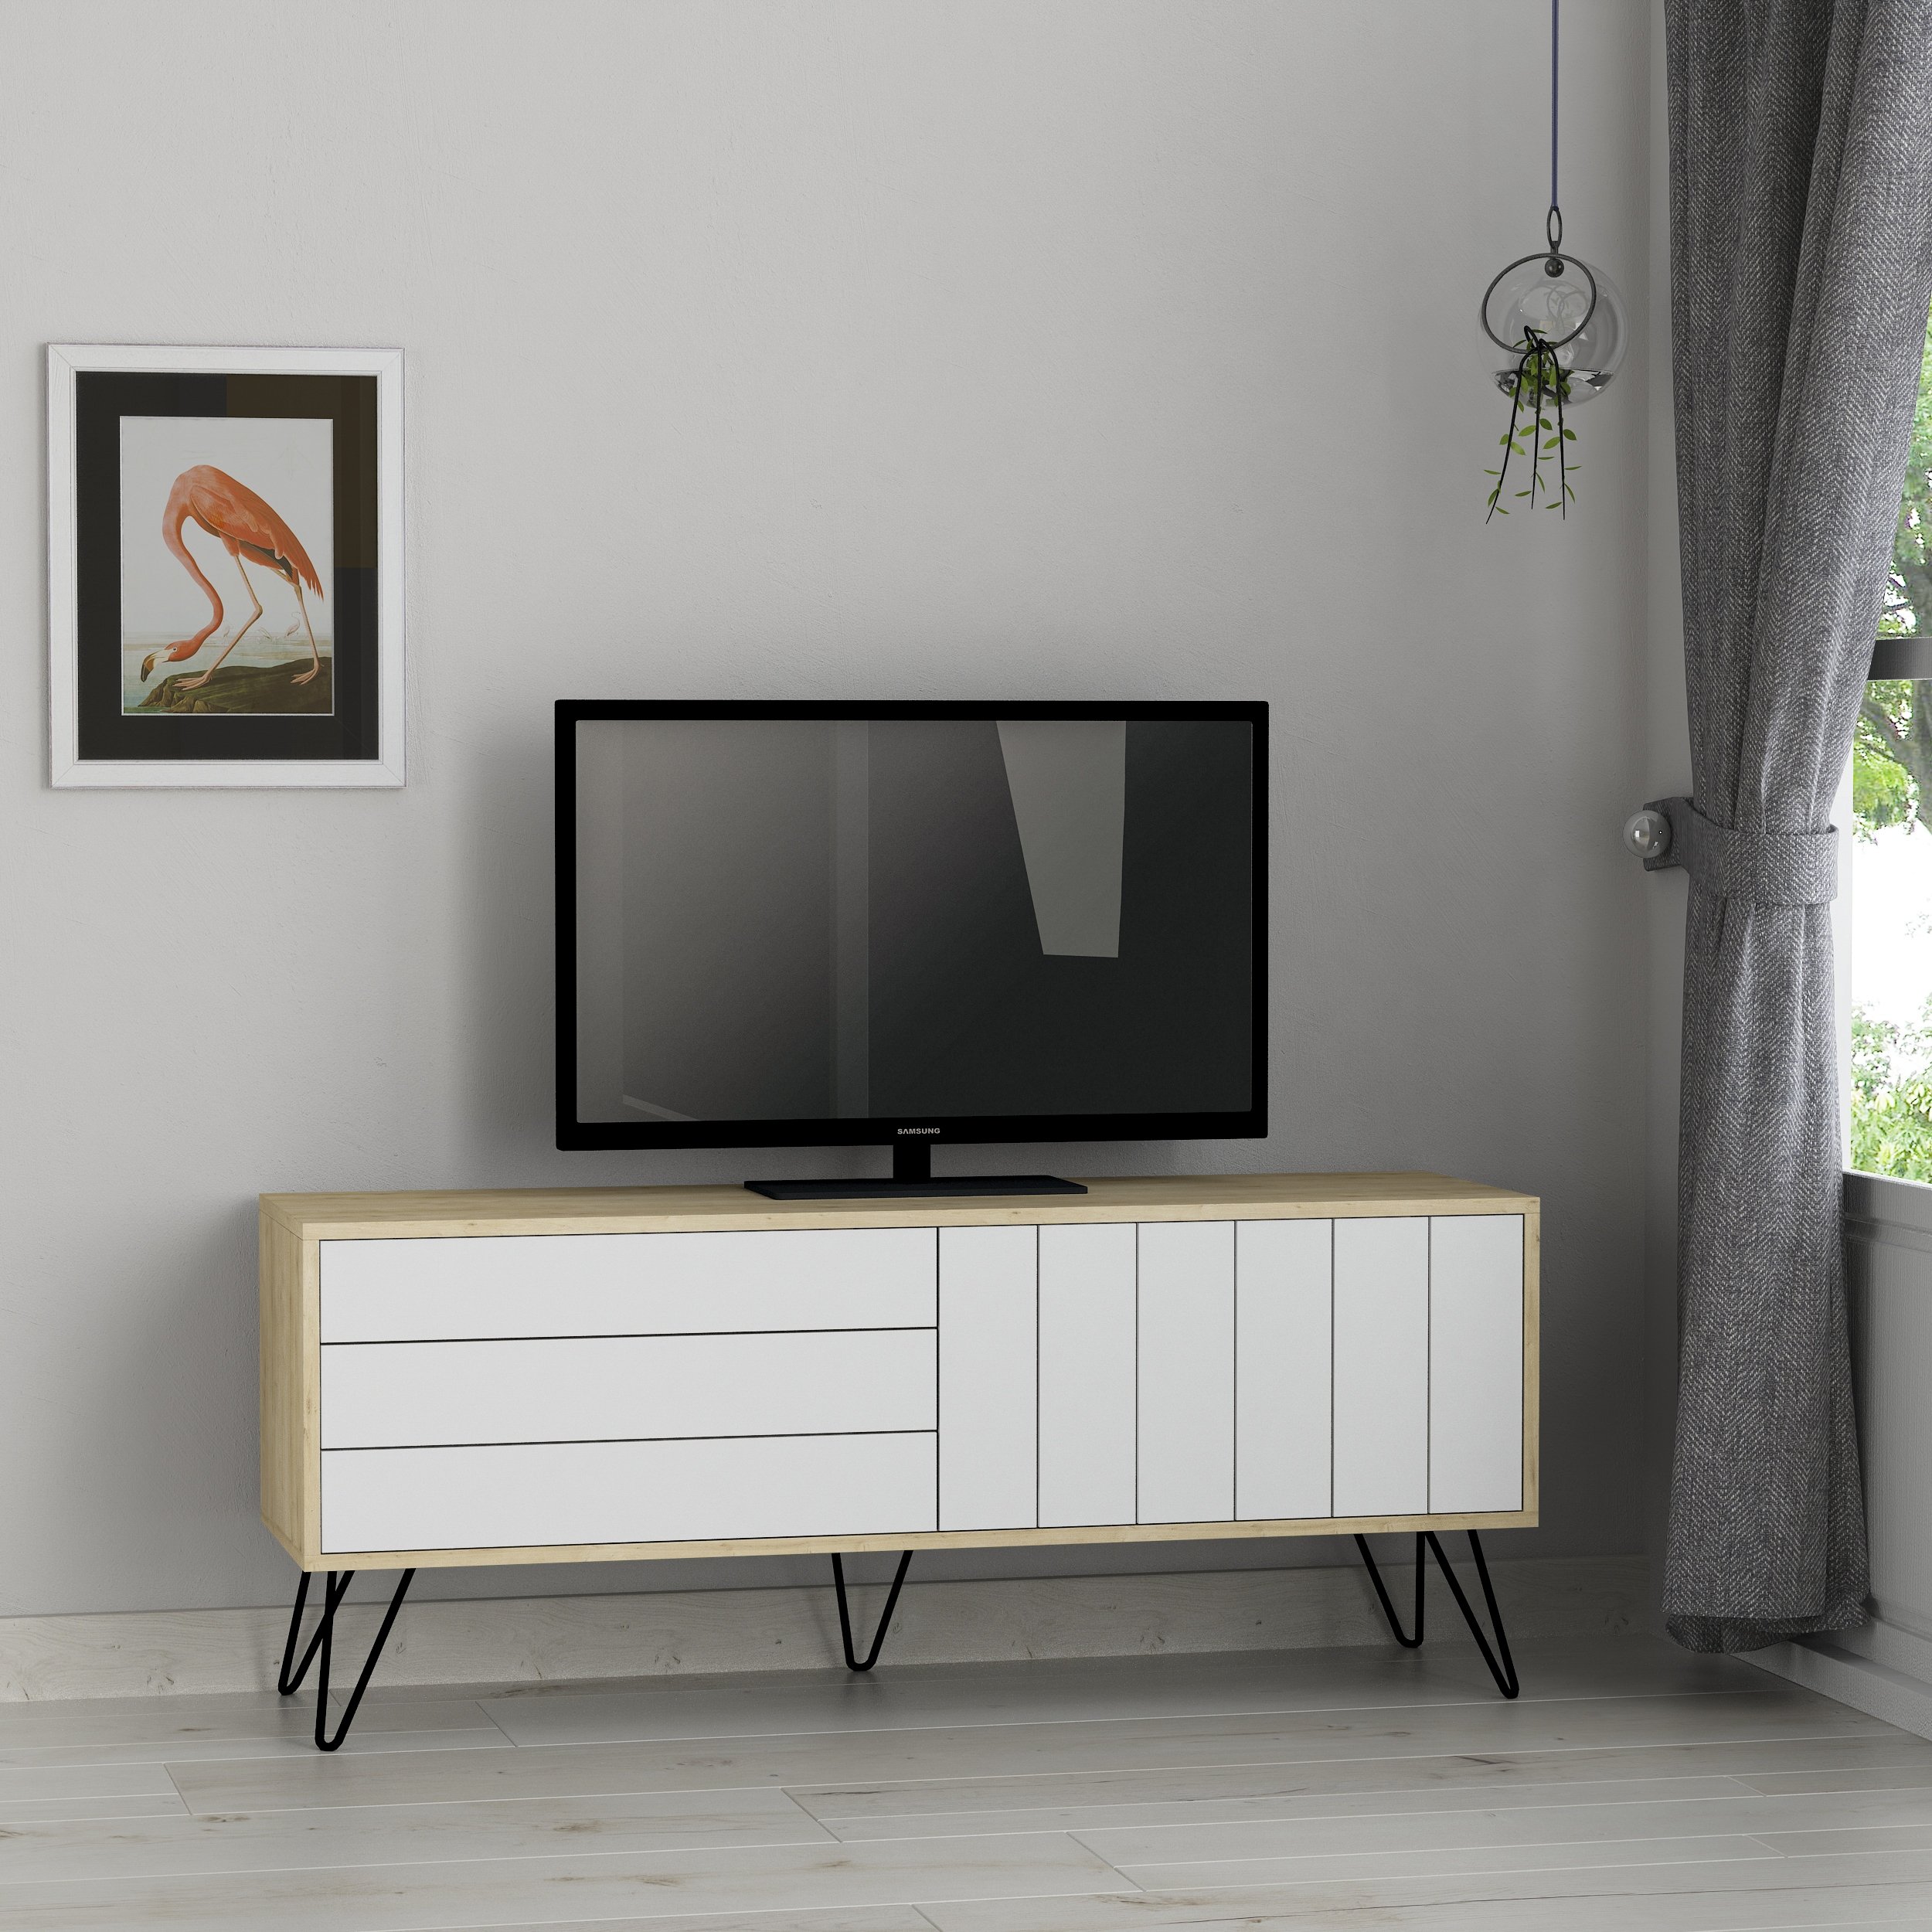 PICADILLY TV STAND - OAK - WHITE - M.TV.18653.2